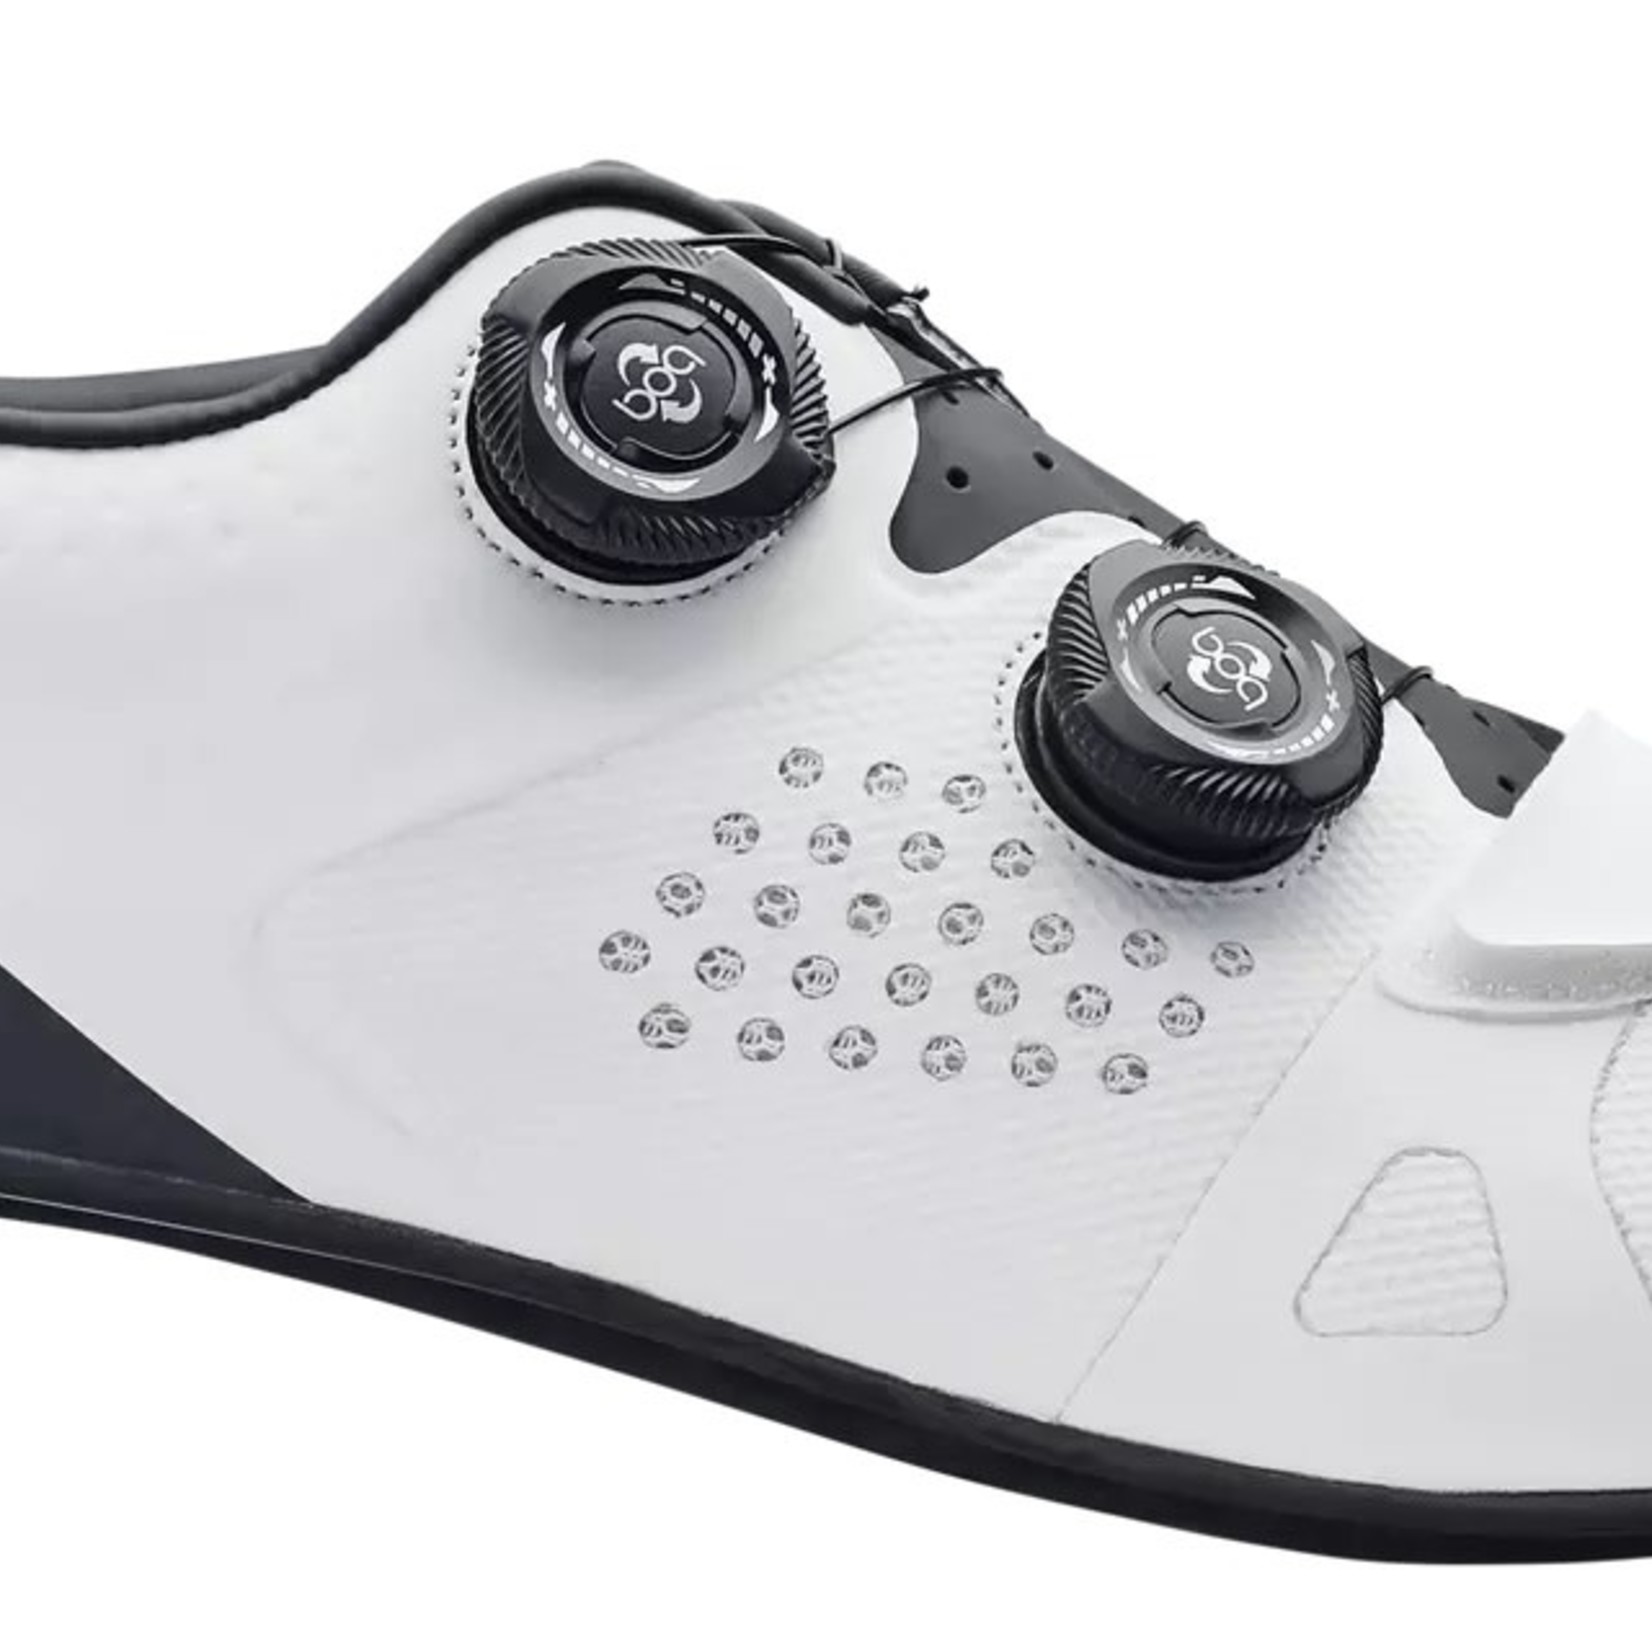 Specialized '19 SPECIALIZED, Torch 3.0 Road Shoes WHITE